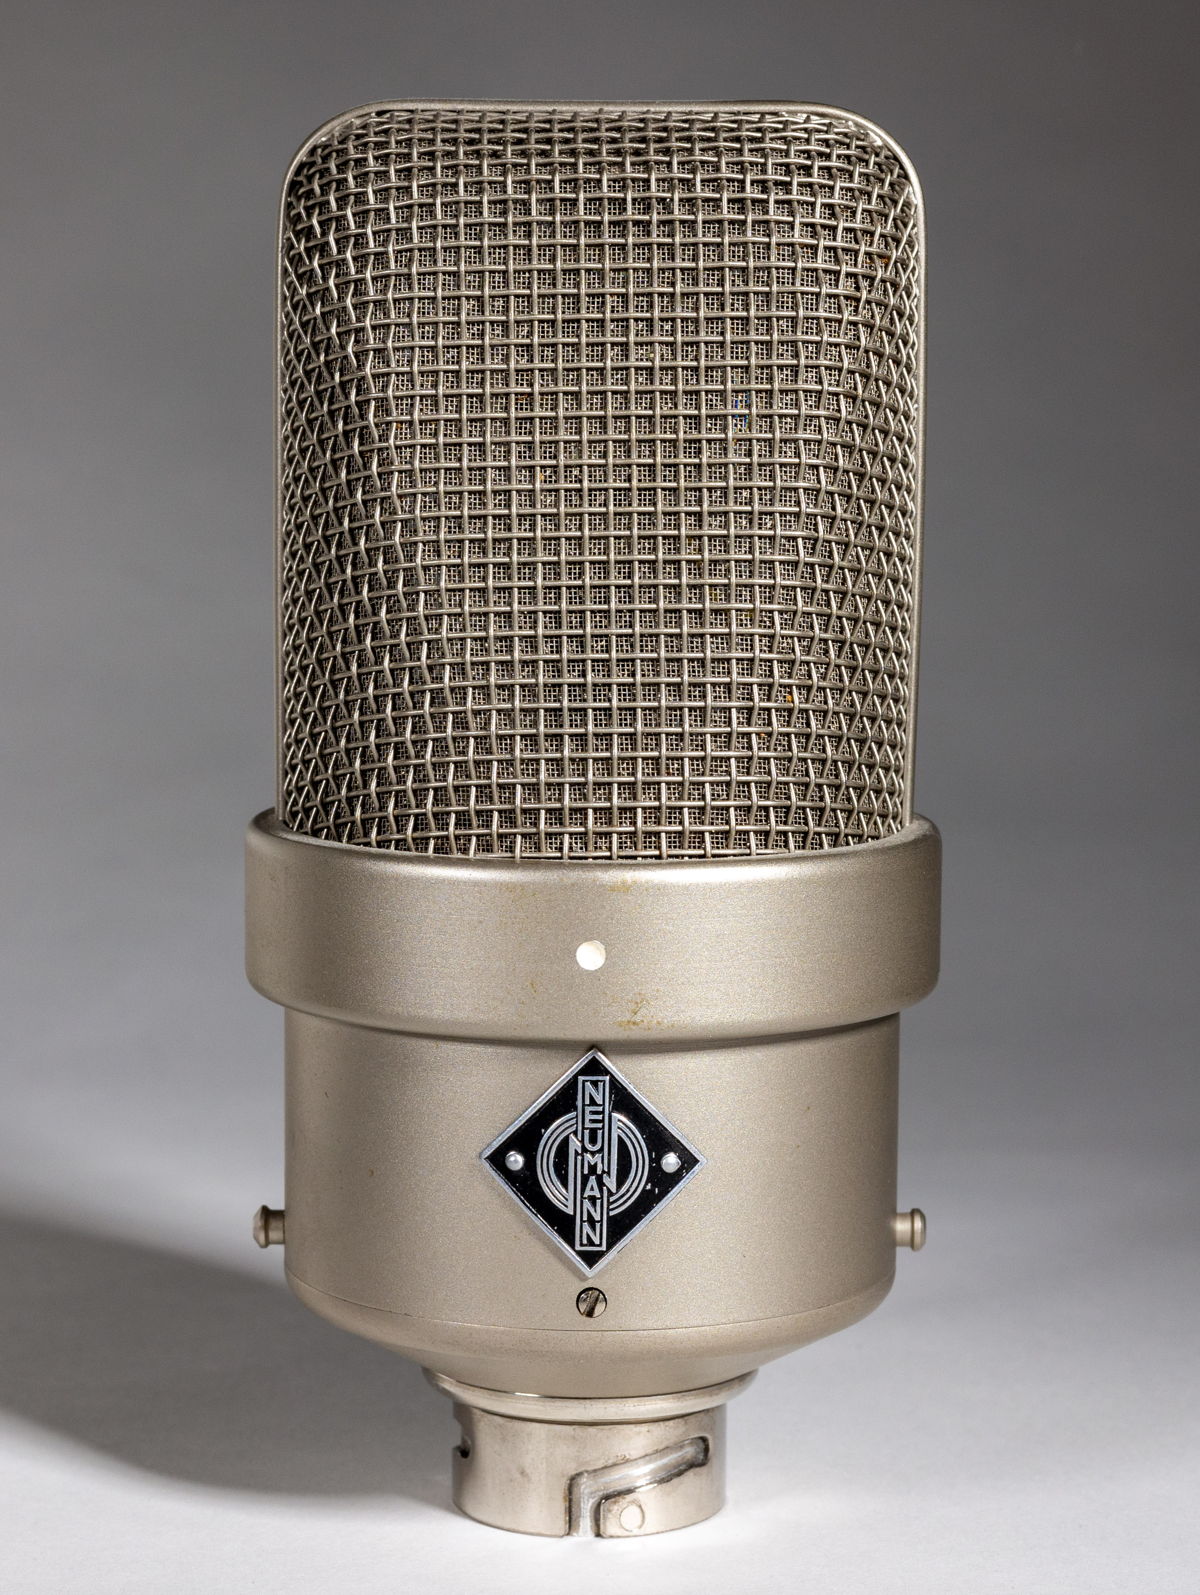 The Neumann M 50 was instrumental in the development of the Decca tree and has played a pivotal role in capturing orchestras with sonic integrity and unsurpassed musical character